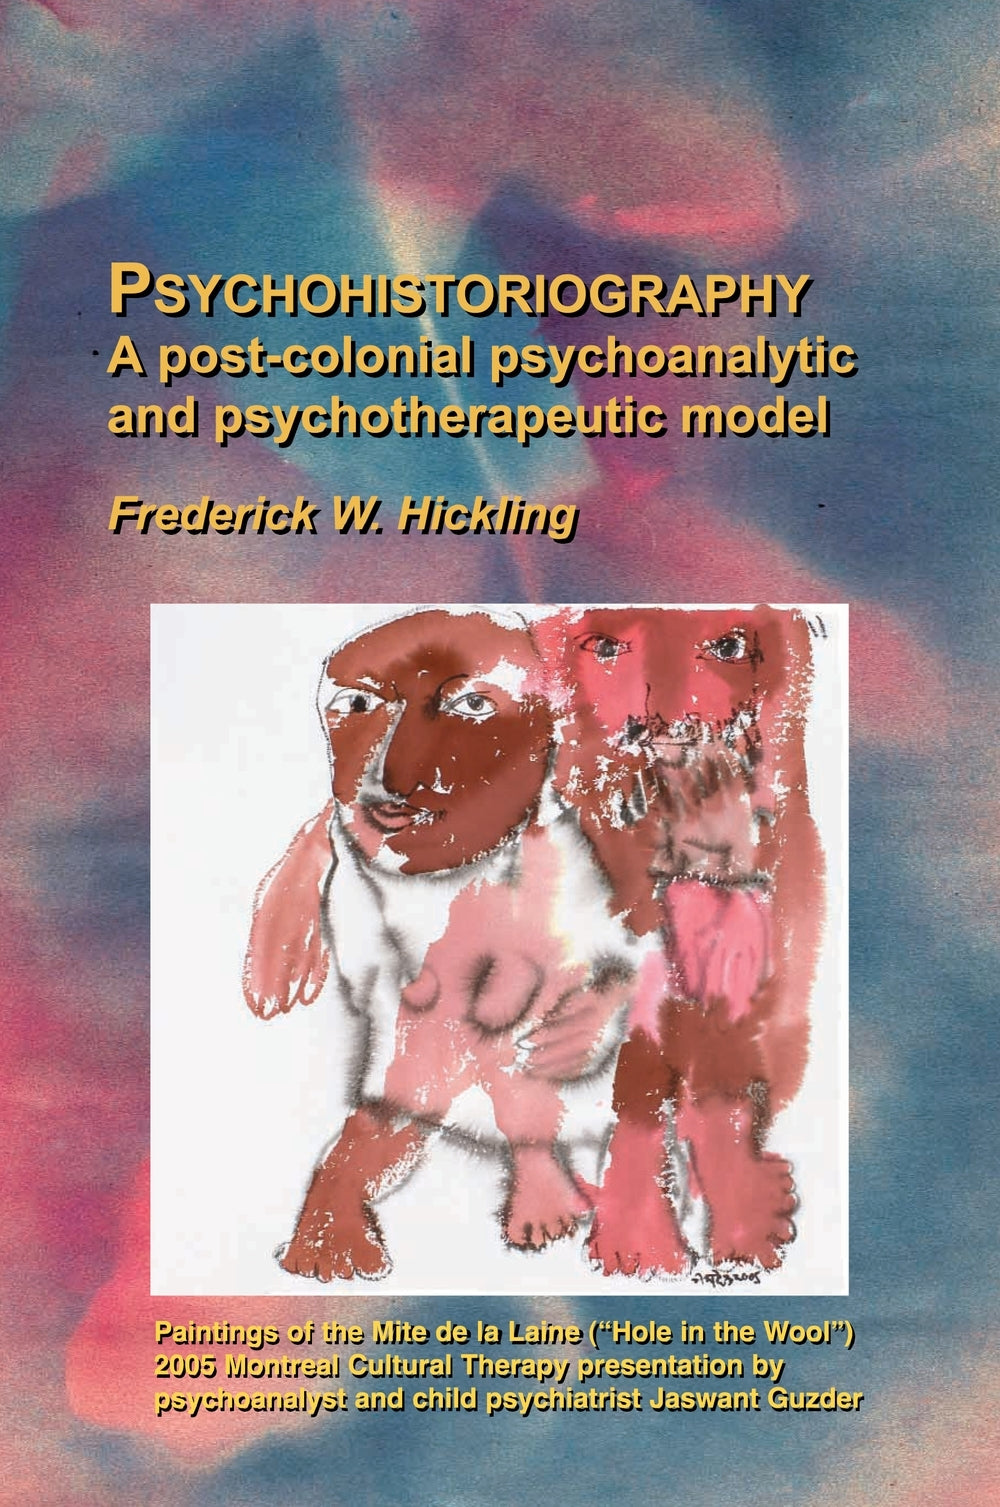 Psychohistoriography by Frederick W. Hickling